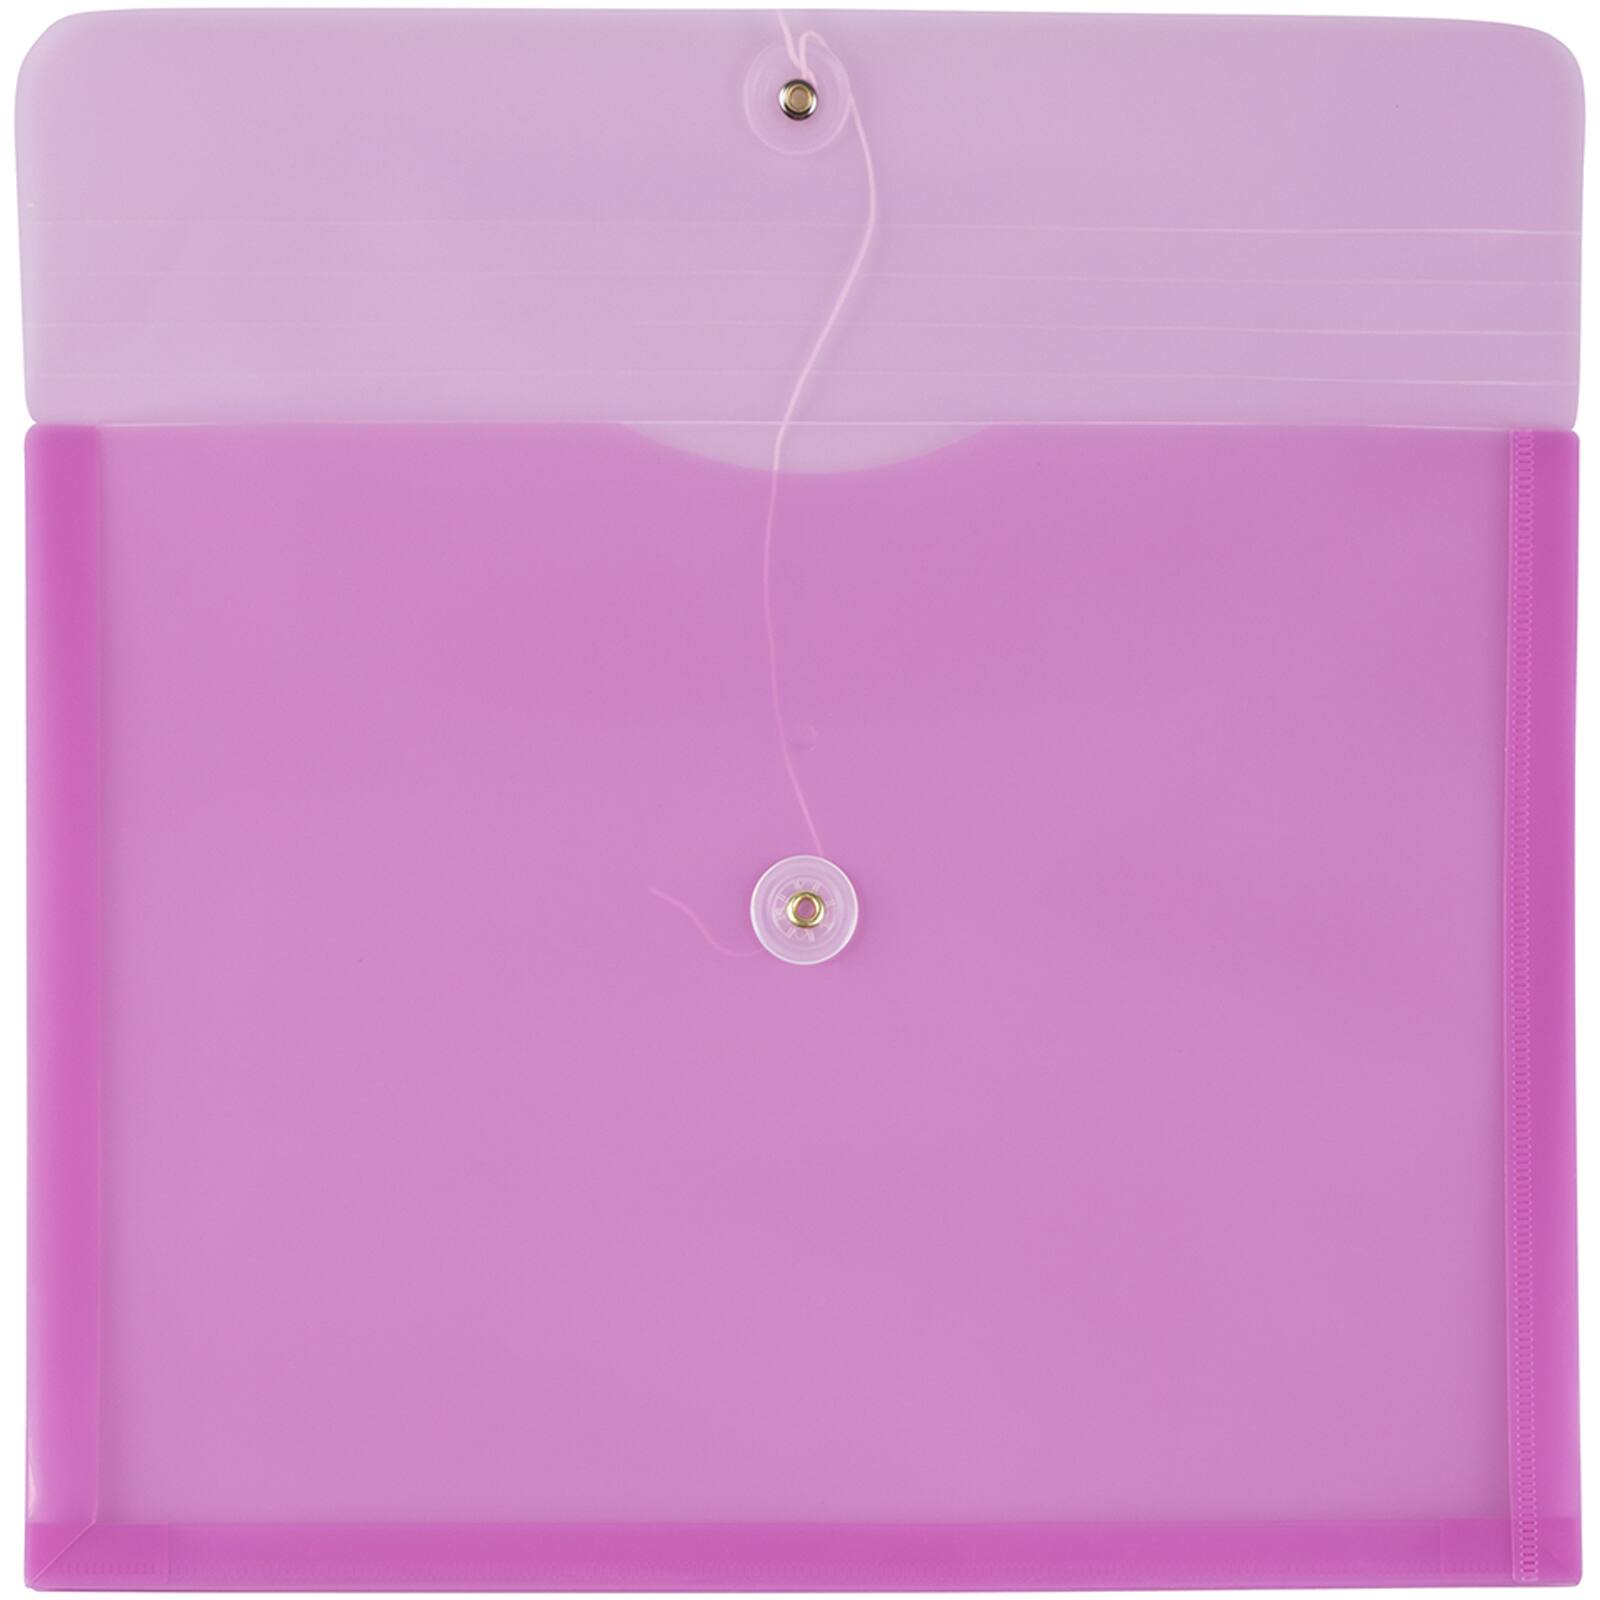 JAM Paper Booklet Plastic Envelopes with Button and String Closure, 108ct.